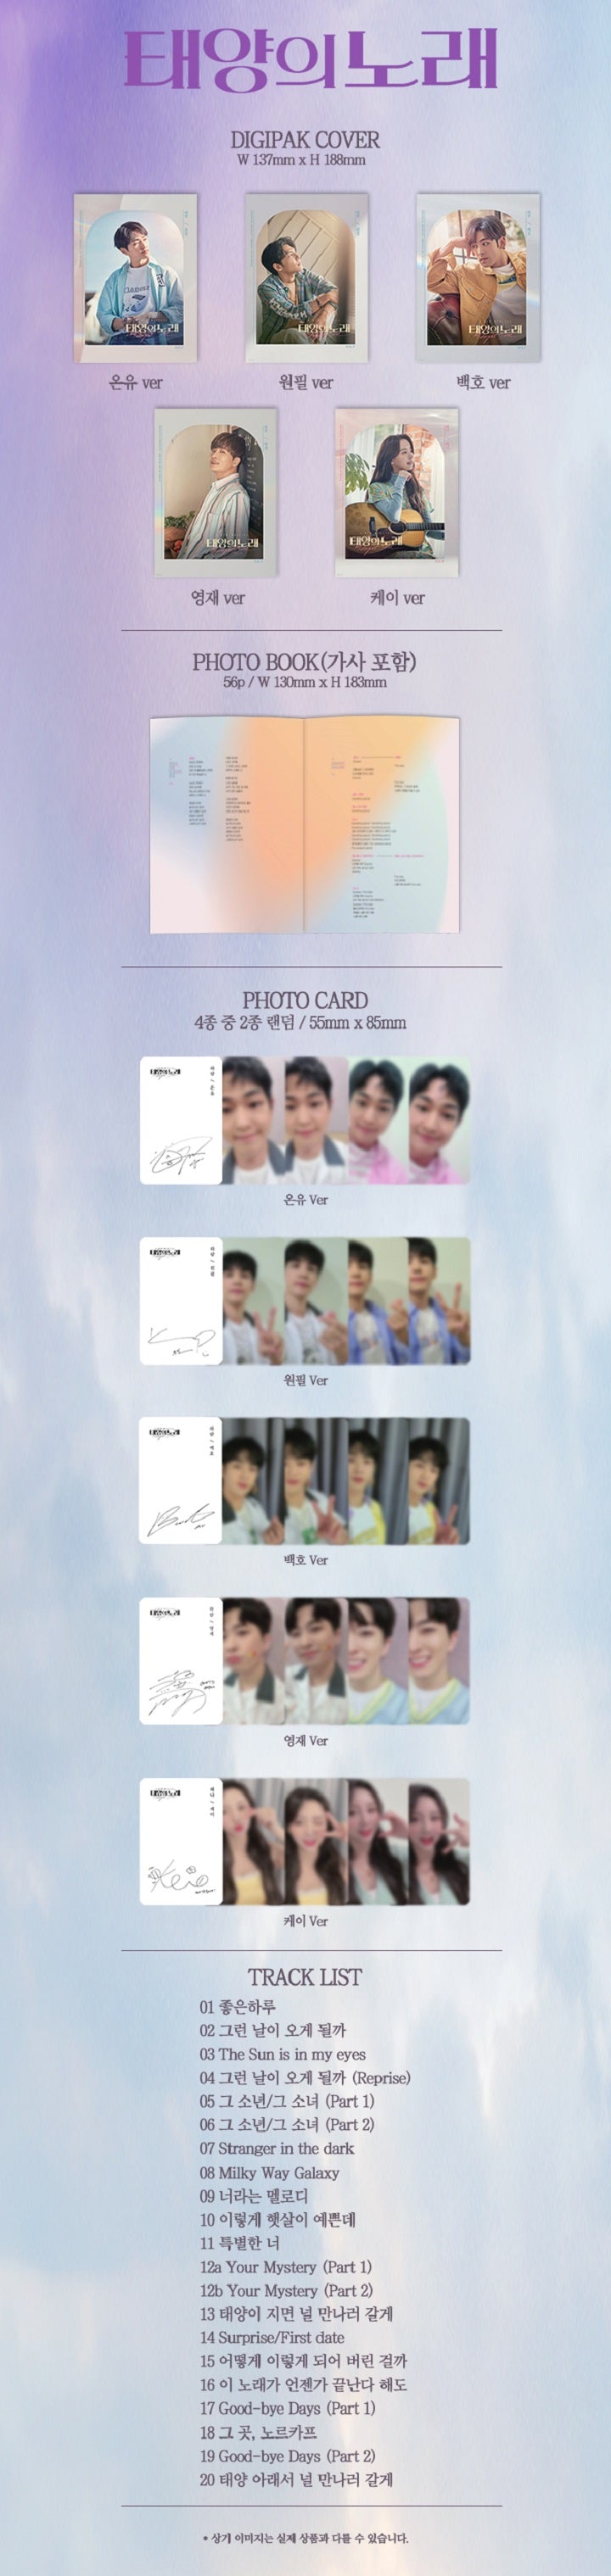 1 CD
1 Photo Book (56 pages)
2 Photo Cards (random out of 4 types)